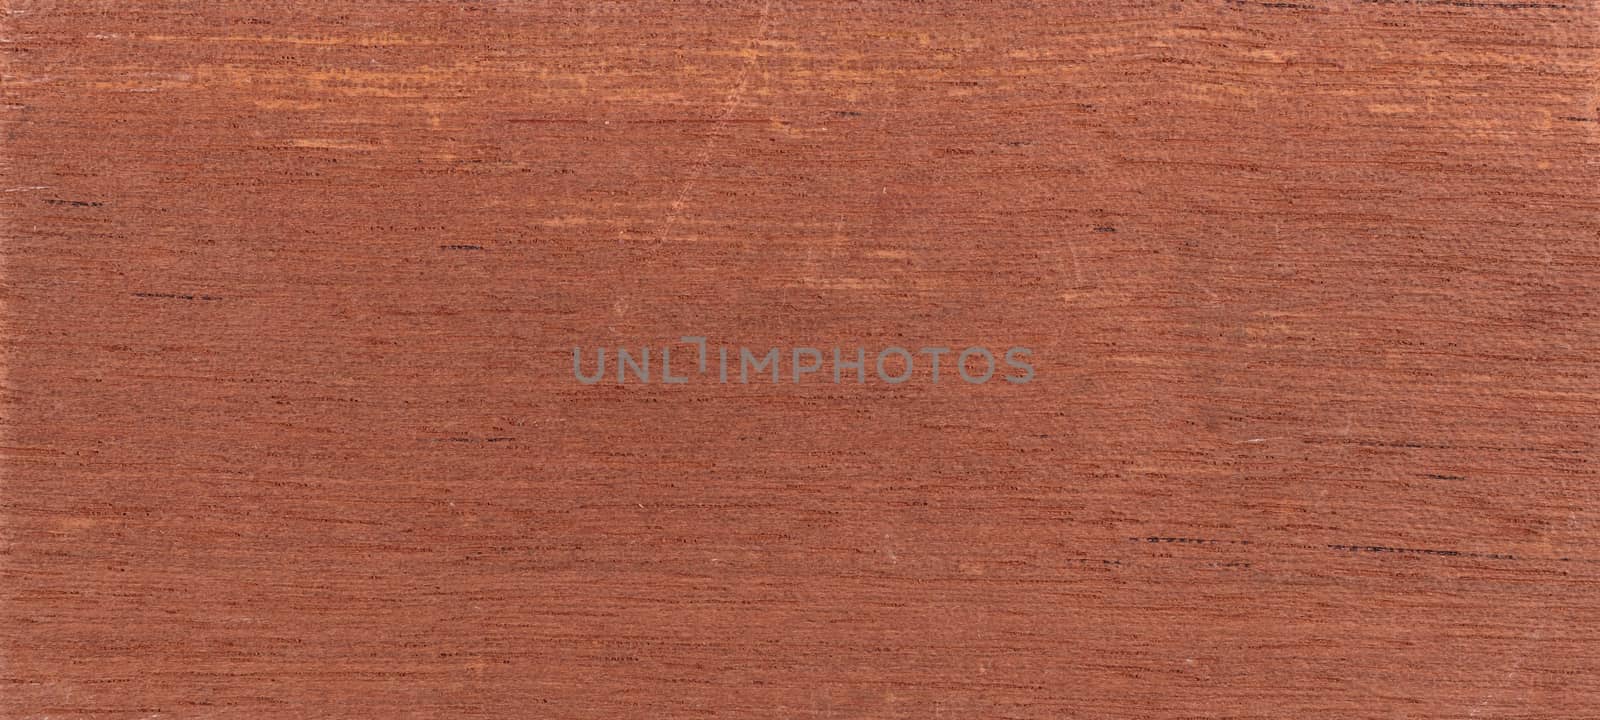 Wood background - Wood from the tropical rainforest - Suriname - Cedrela odorata